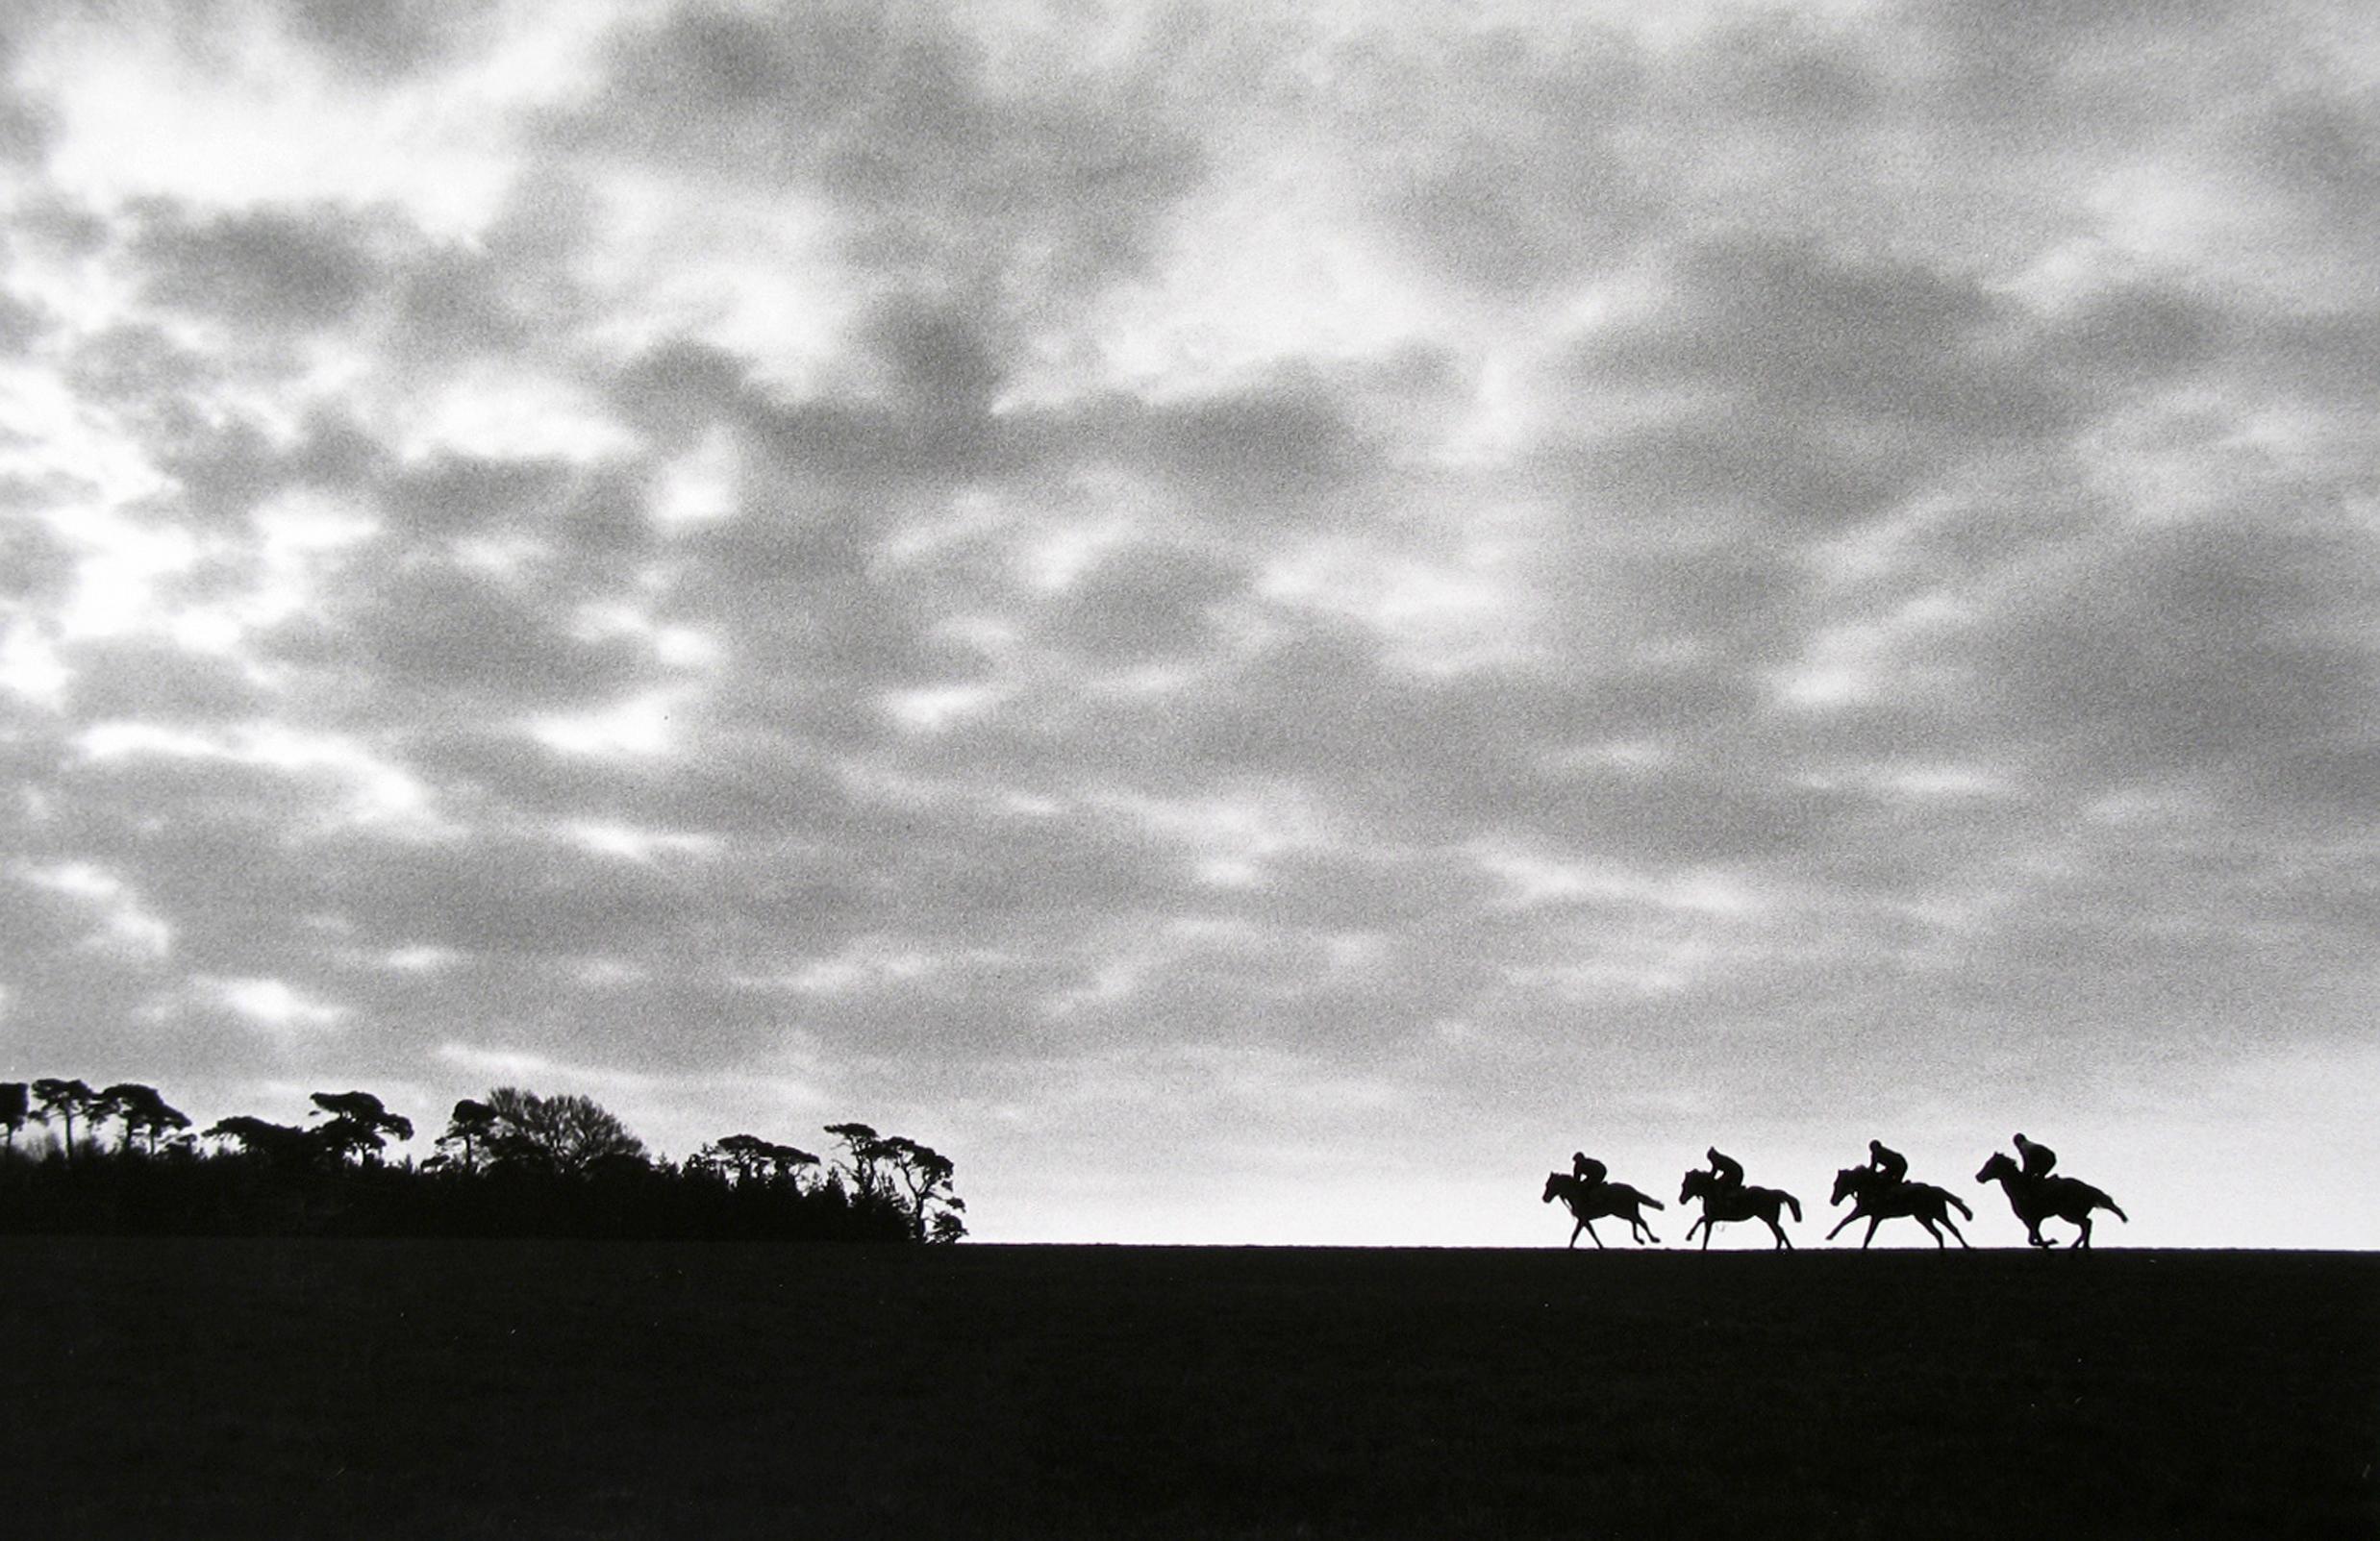 Norman Mauskopf, Marysville, California 1984, (from the Dark Horses book), gelatin silver print, paper size: 11 x 14". matted: 16x20". Norman Mauskopf’s second published book, Dark Horses, was published in 1988, and documents the world of